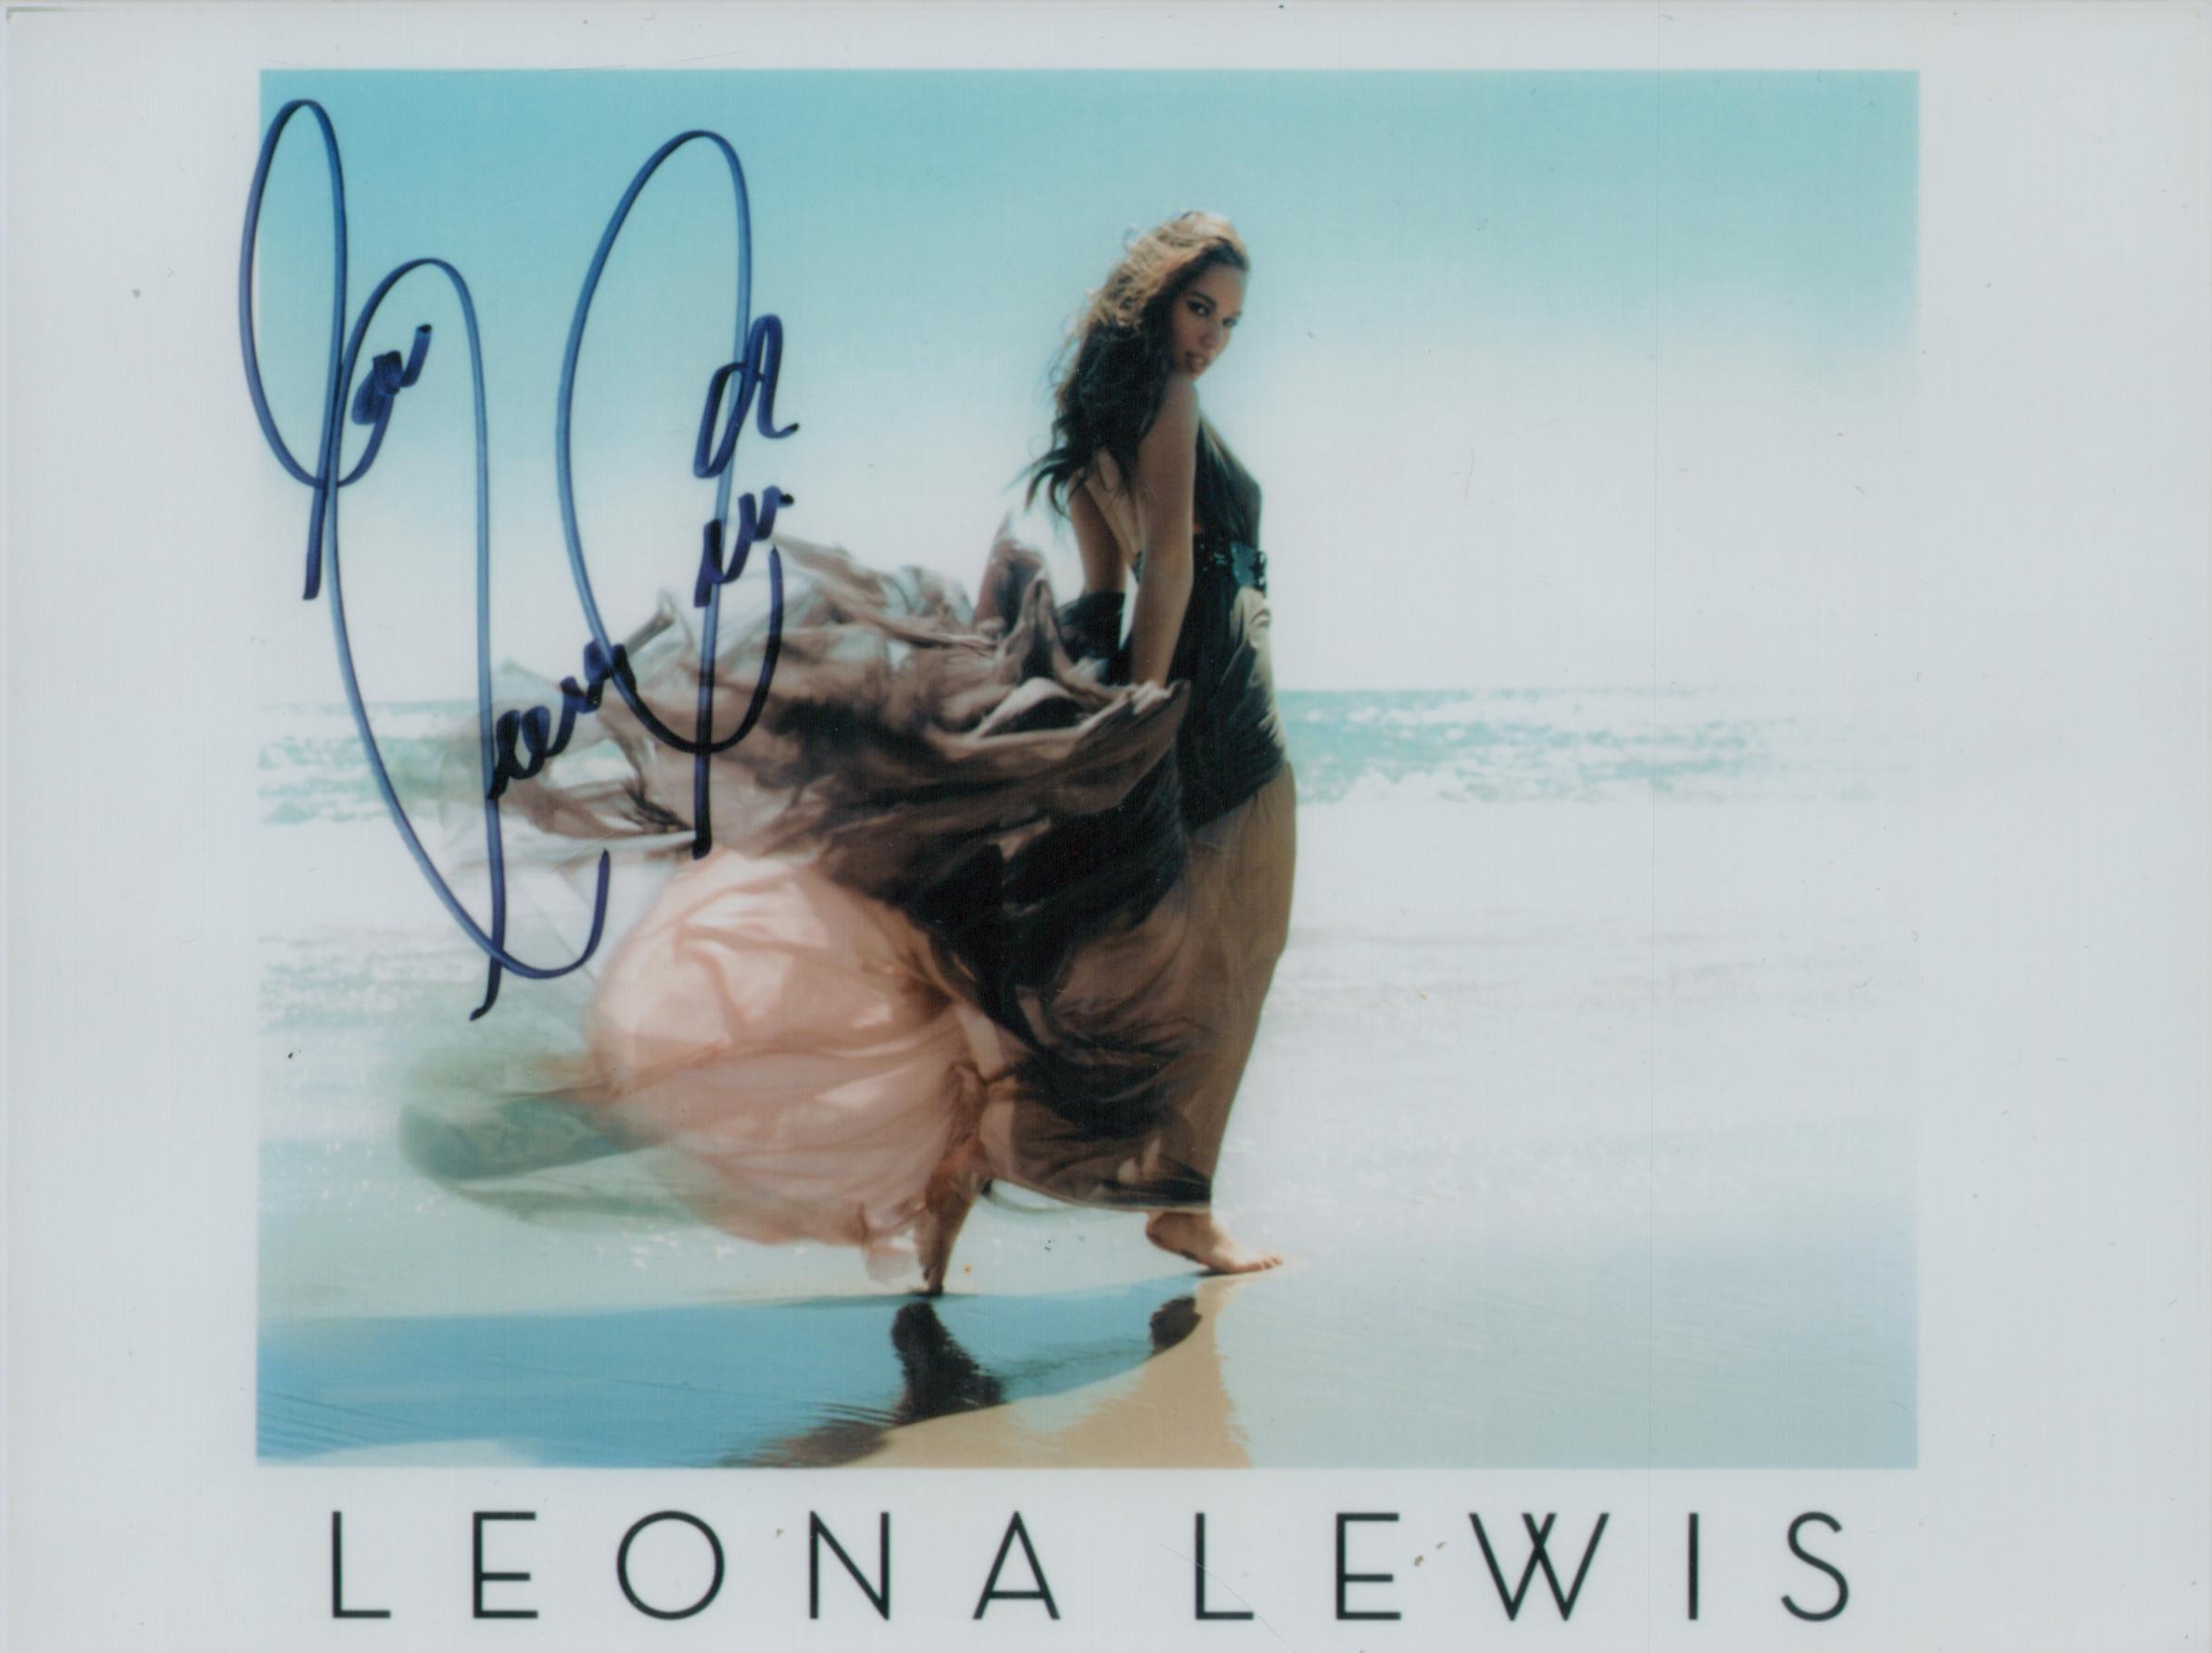 Leona Lewis signed 8x6 inch colour promo photo. Good Condition. All autographs come with a